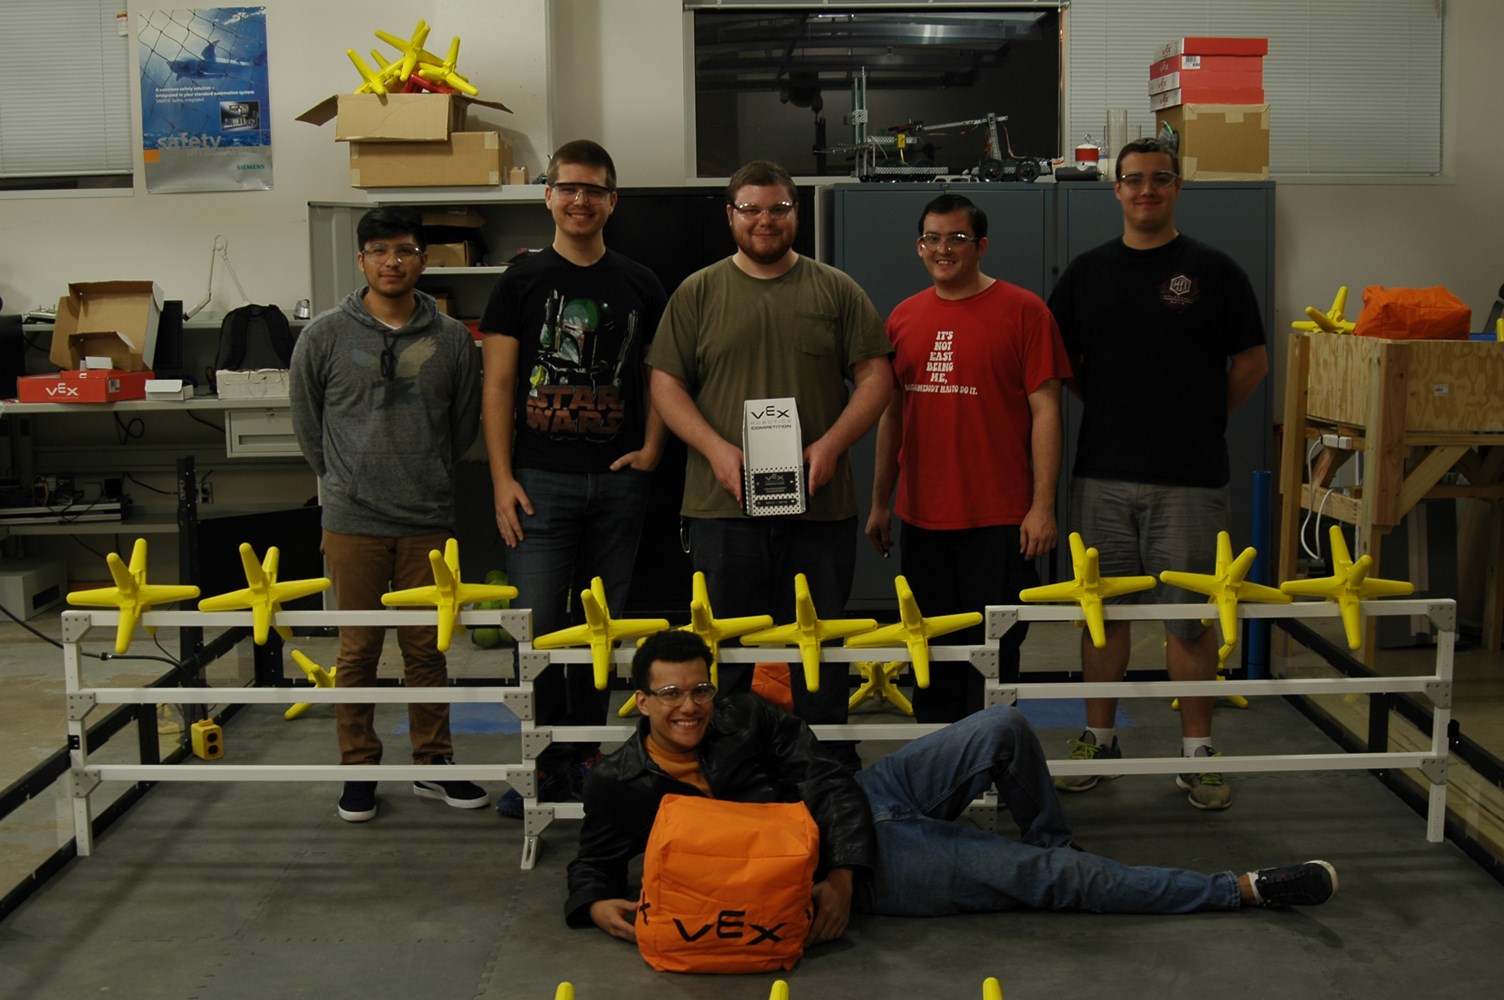 Club of the week: VEX Robotics Competition Team